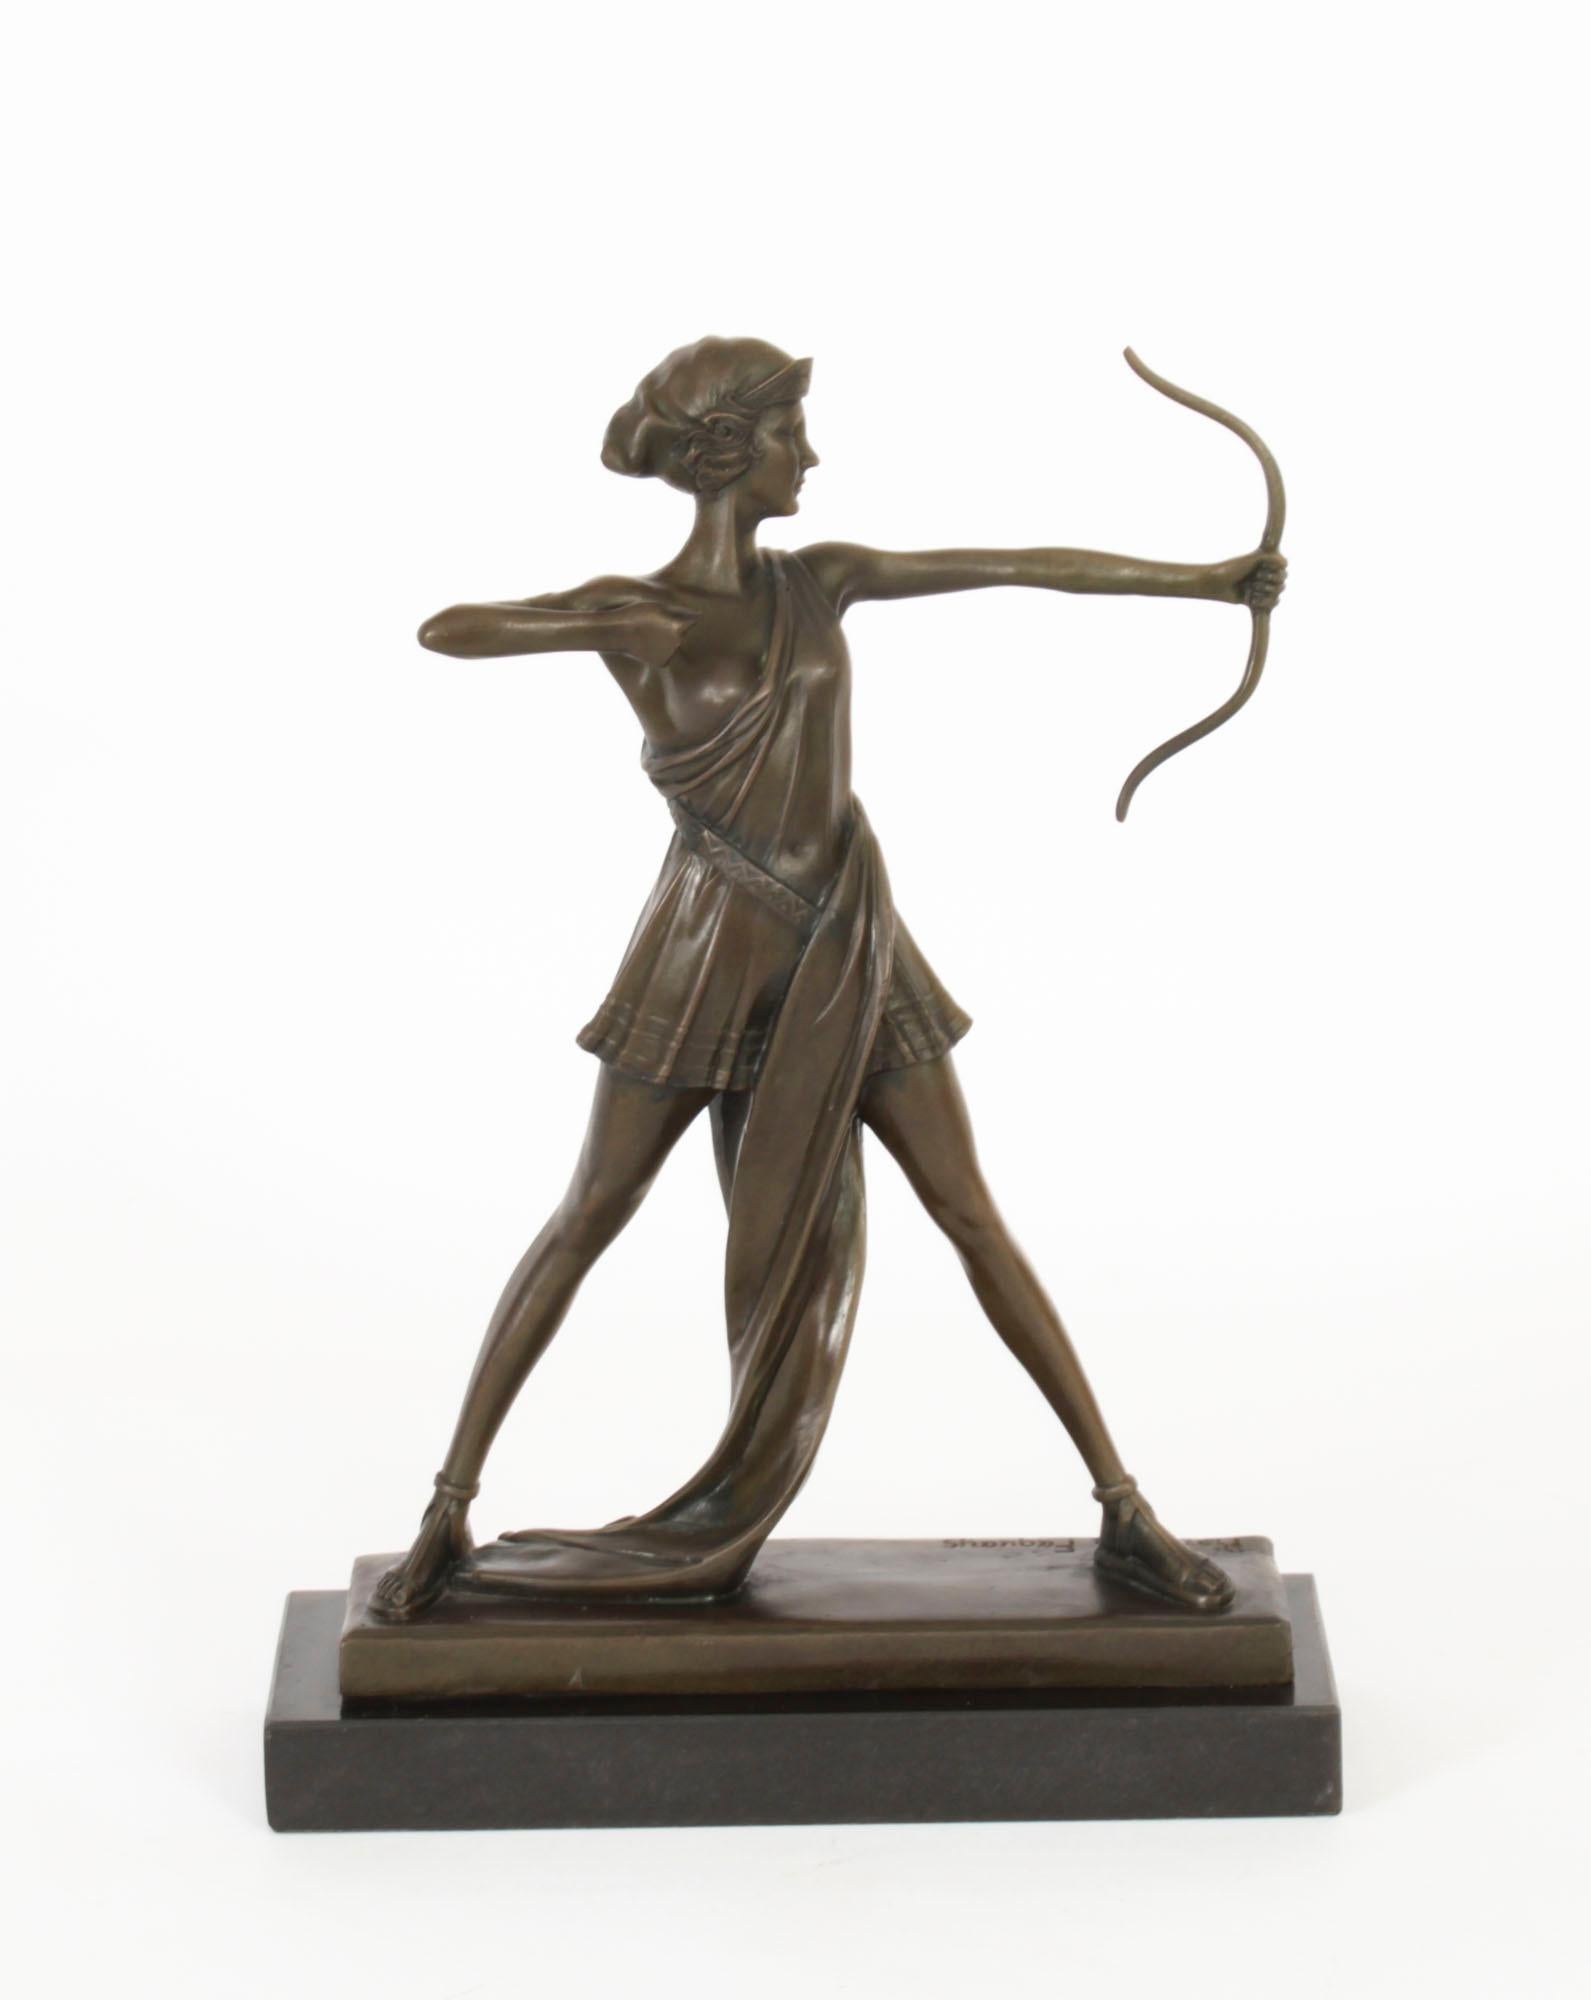 A beautiful Art Deco sculpture depicting Diana, signed on the base, Pierre La Faguays (French, 1892-1962) circa 1920 in date.

The sculpture in a striking dark brown patina, the art cast-bronze features Diana the Huntress with outstretched arms